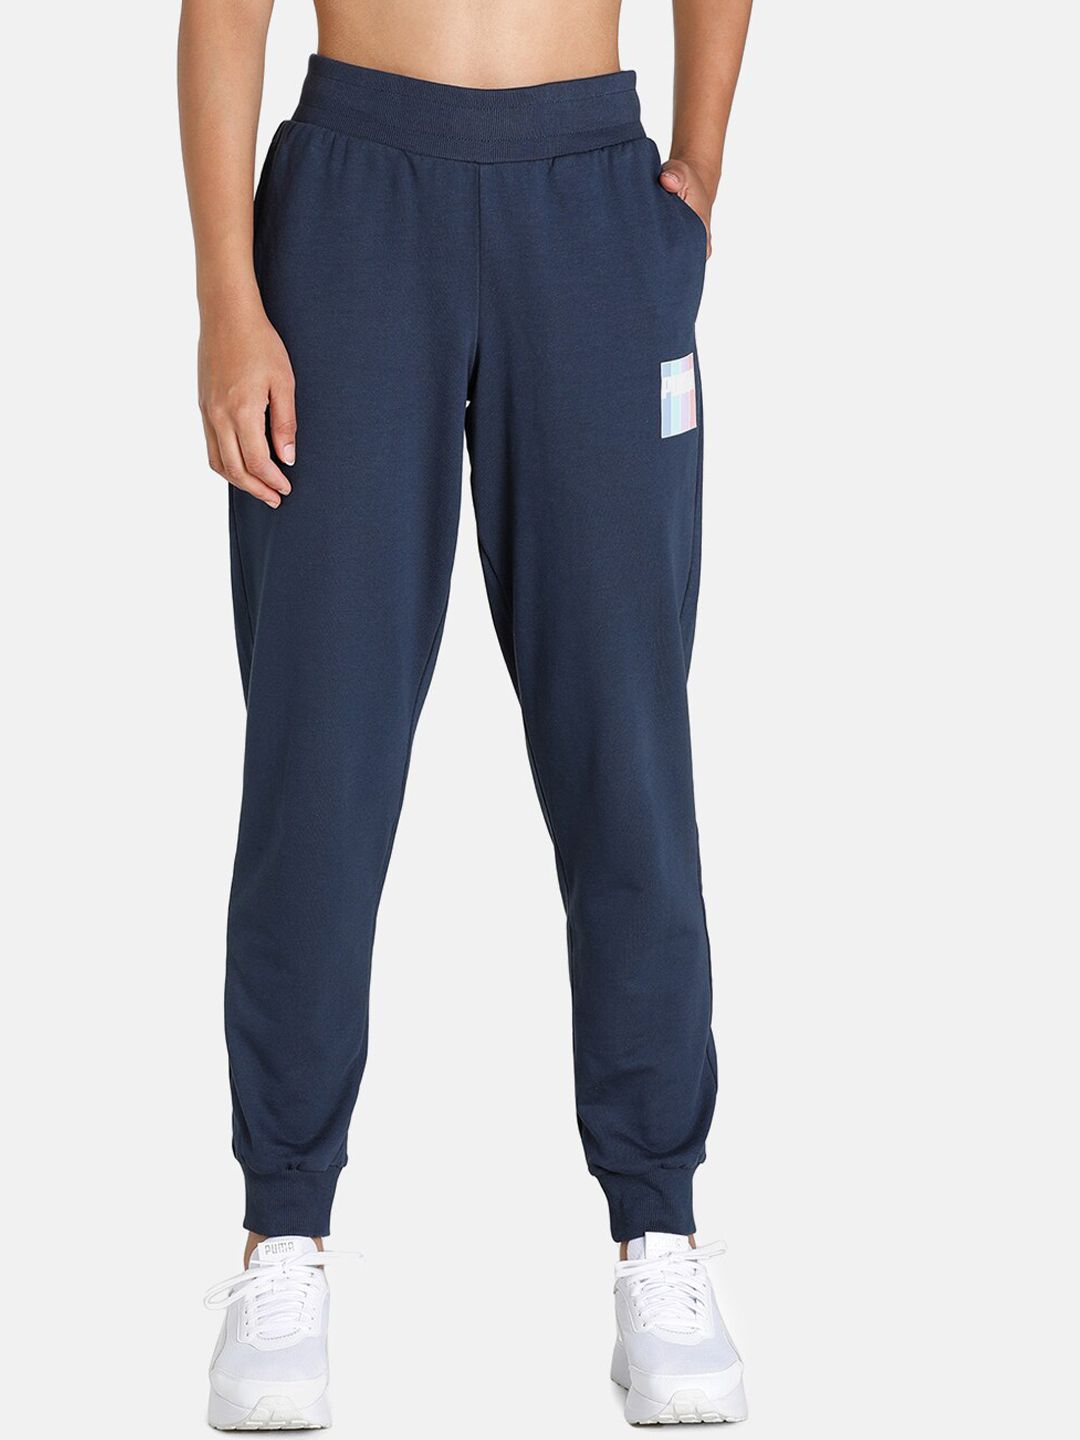 Puma Women Blue Solid Track Pant Price in India